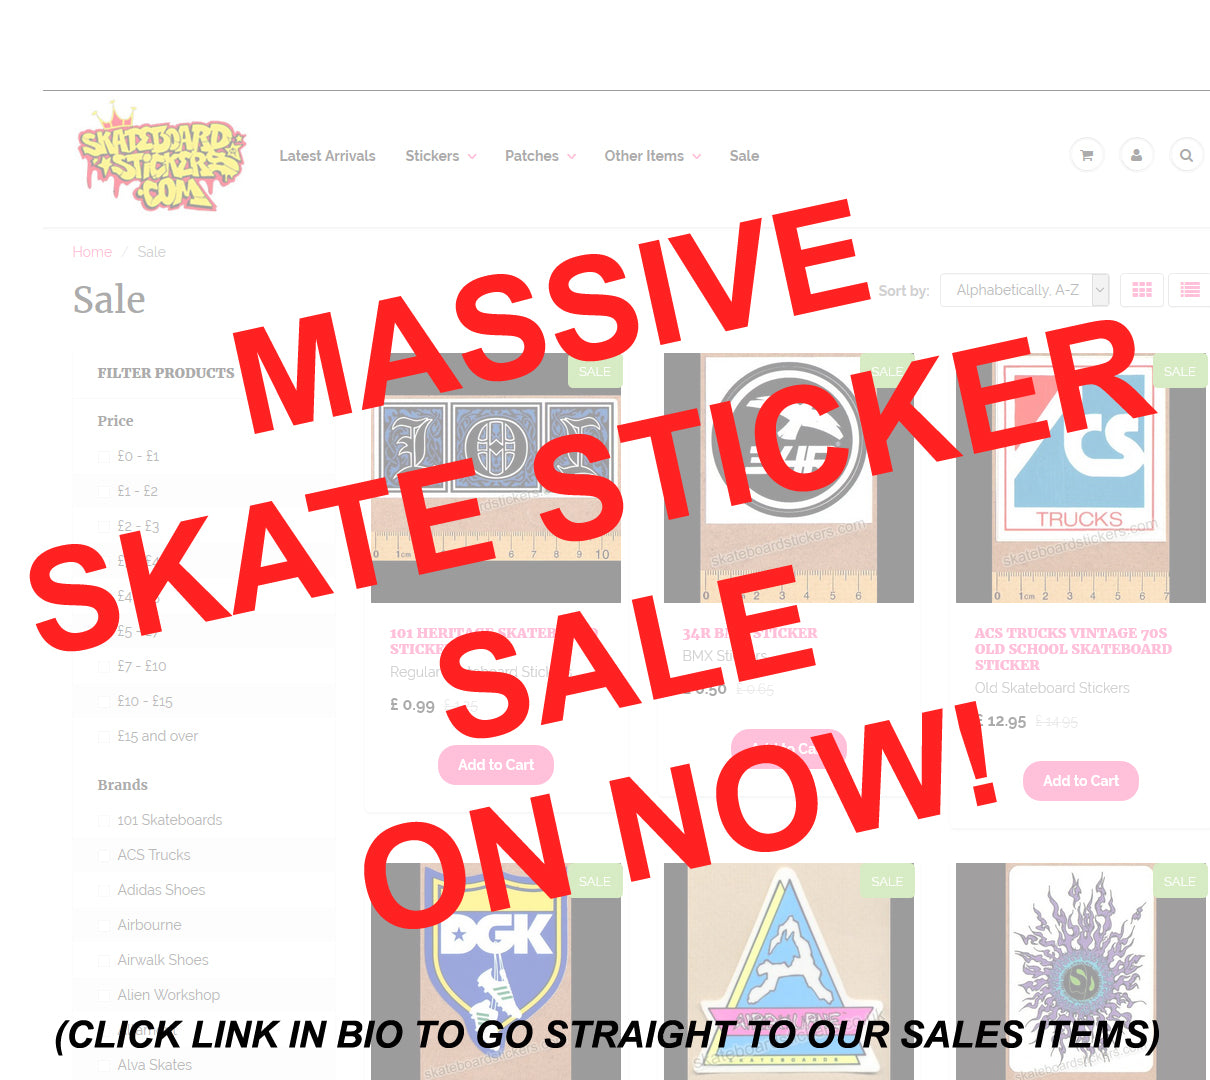 MASSIVE SKATE STICKERS SALE ON NOW!!